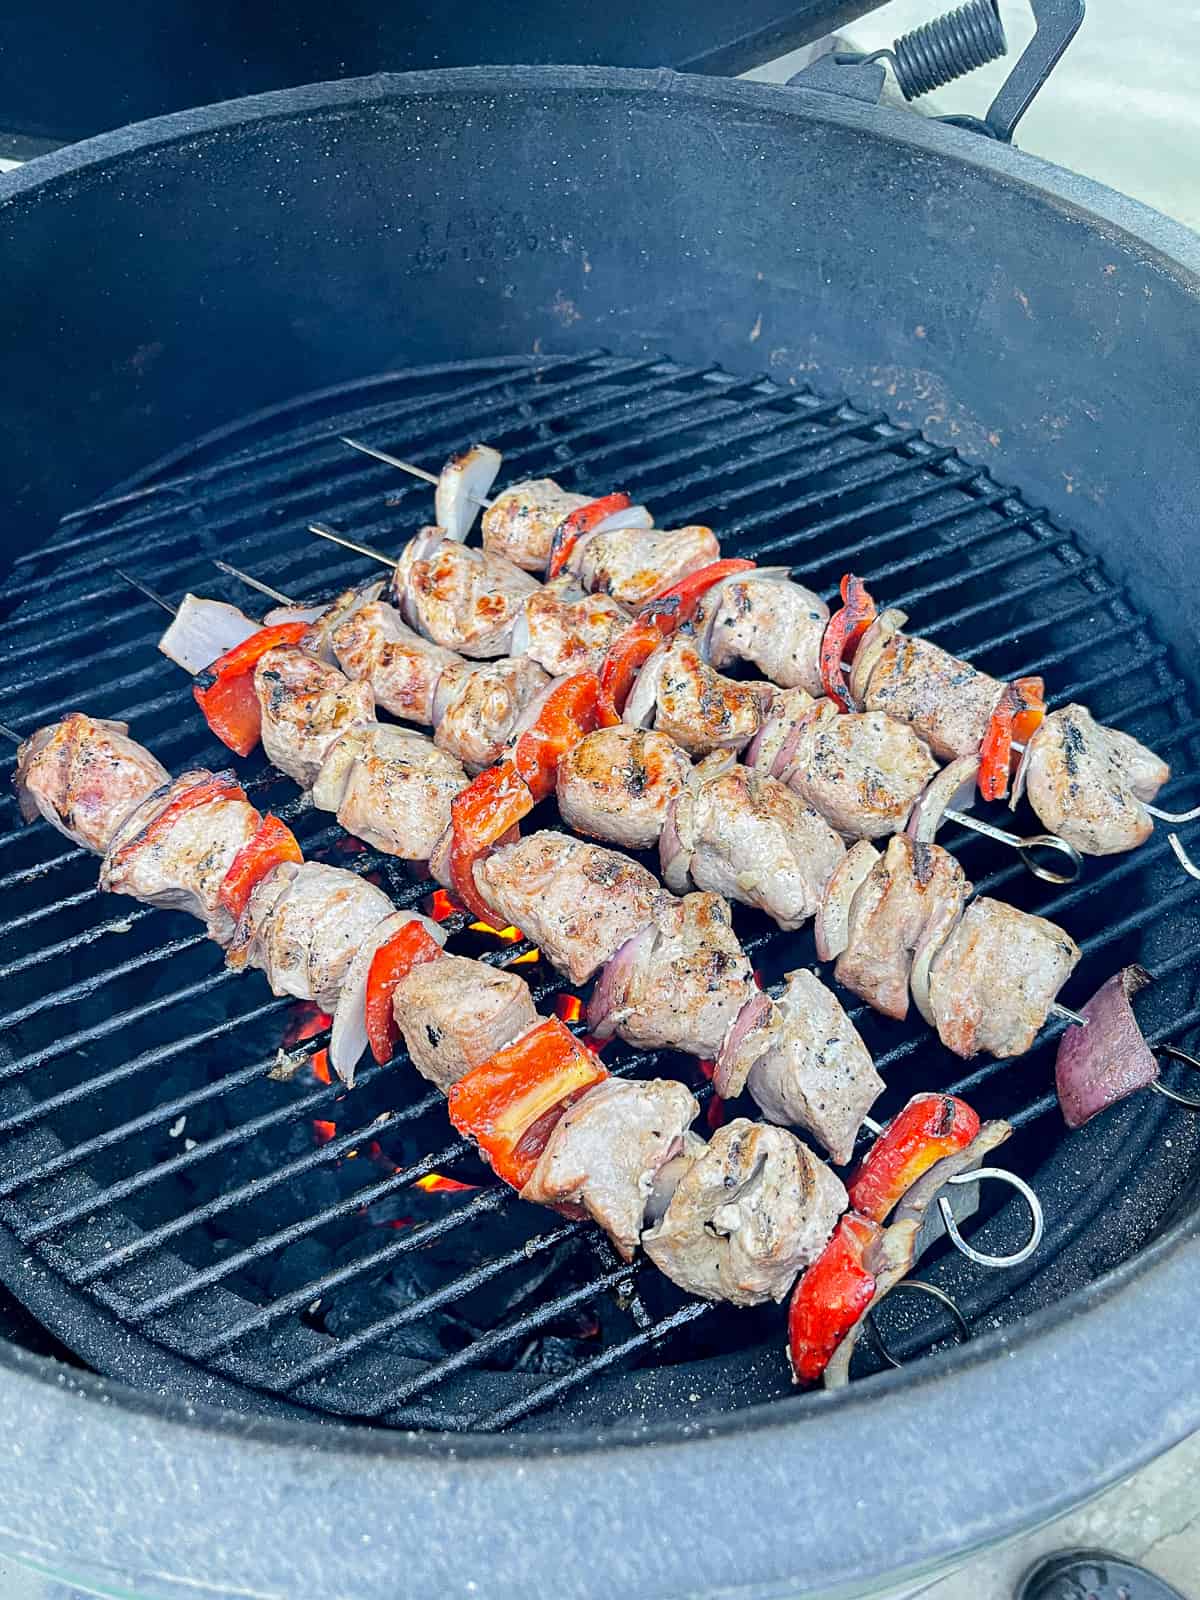 The big green egg with the kabobs.